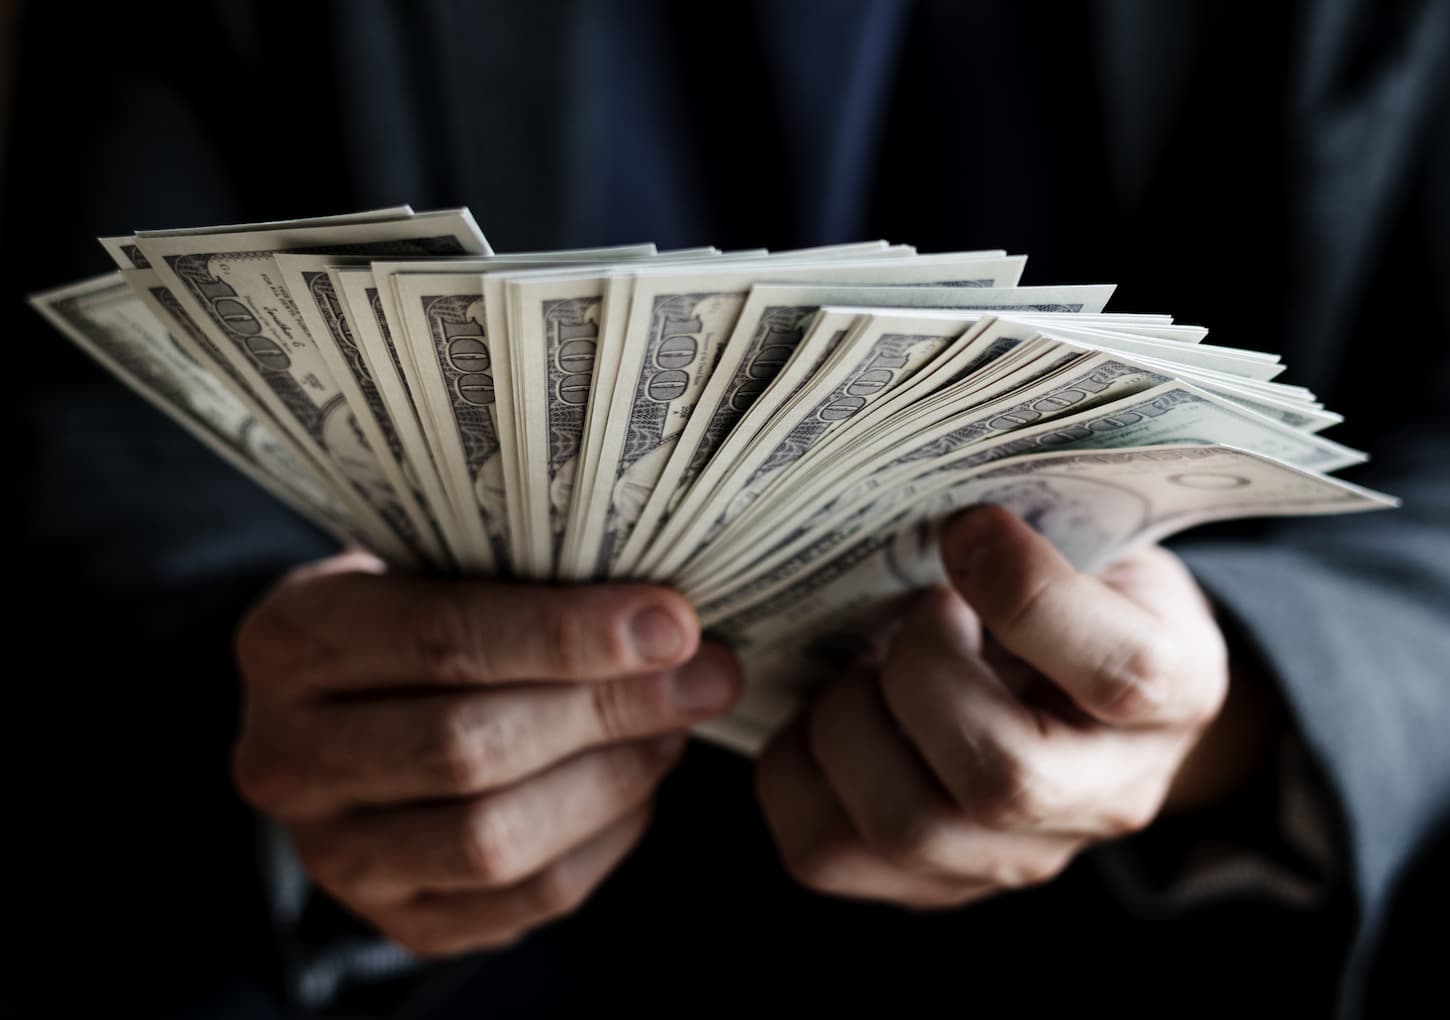 An image of hands holding cash.